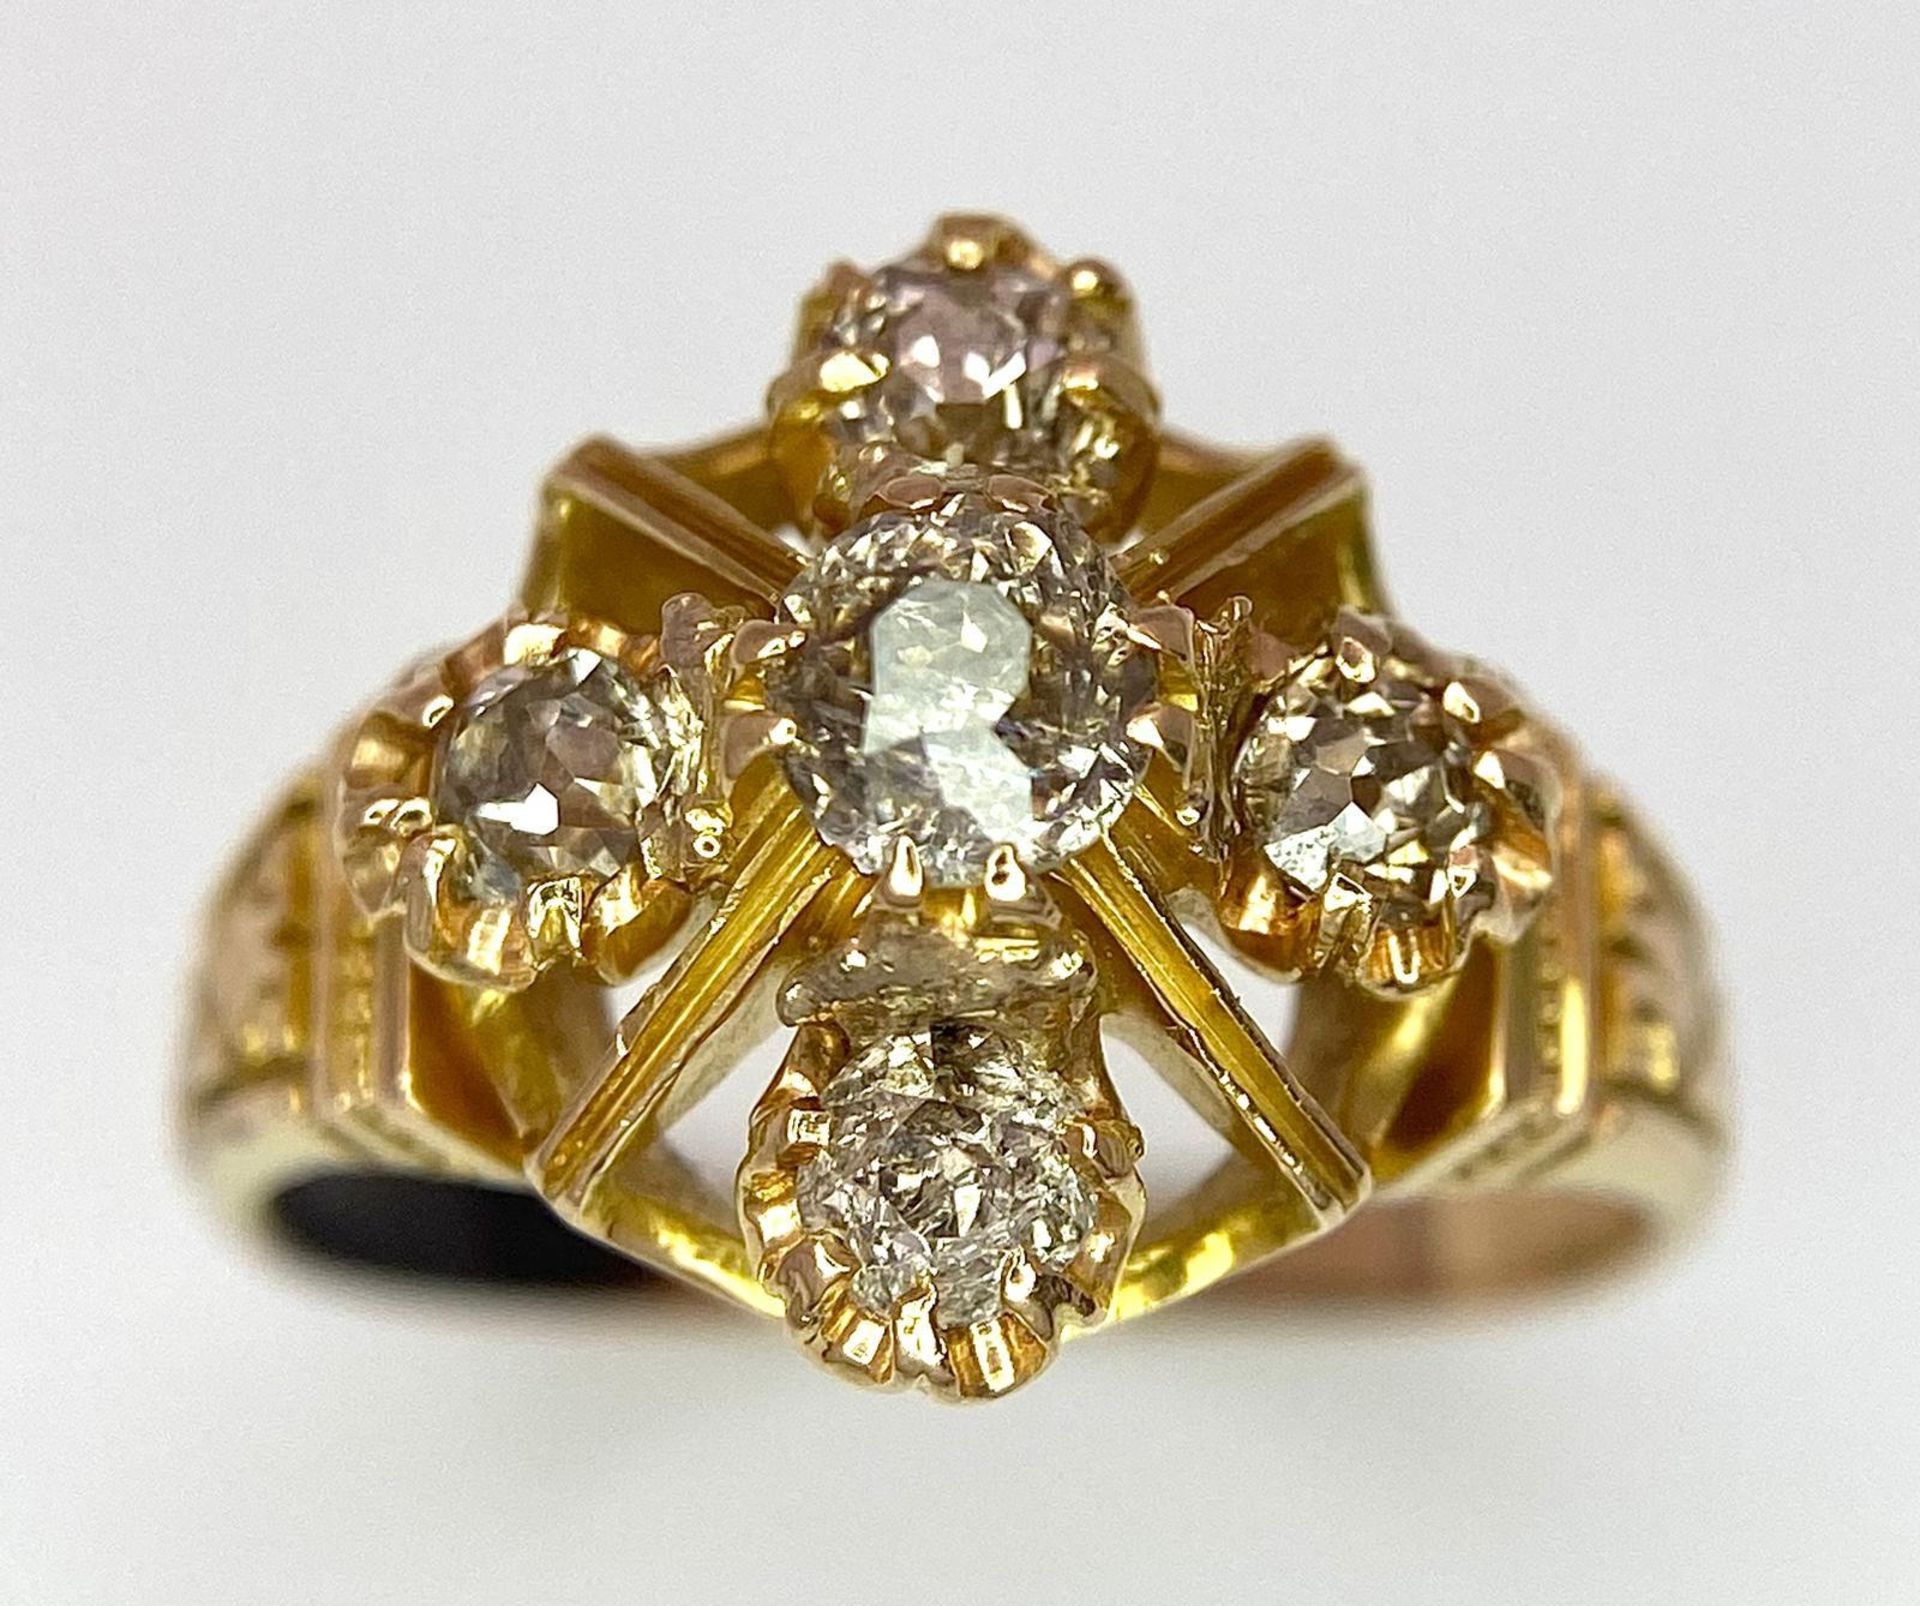 A 9K Yellow Gold (tested) Diamond Ring. Five round cut diamonds on a raised setting. Size N. 4.32g - Image 3 of 5